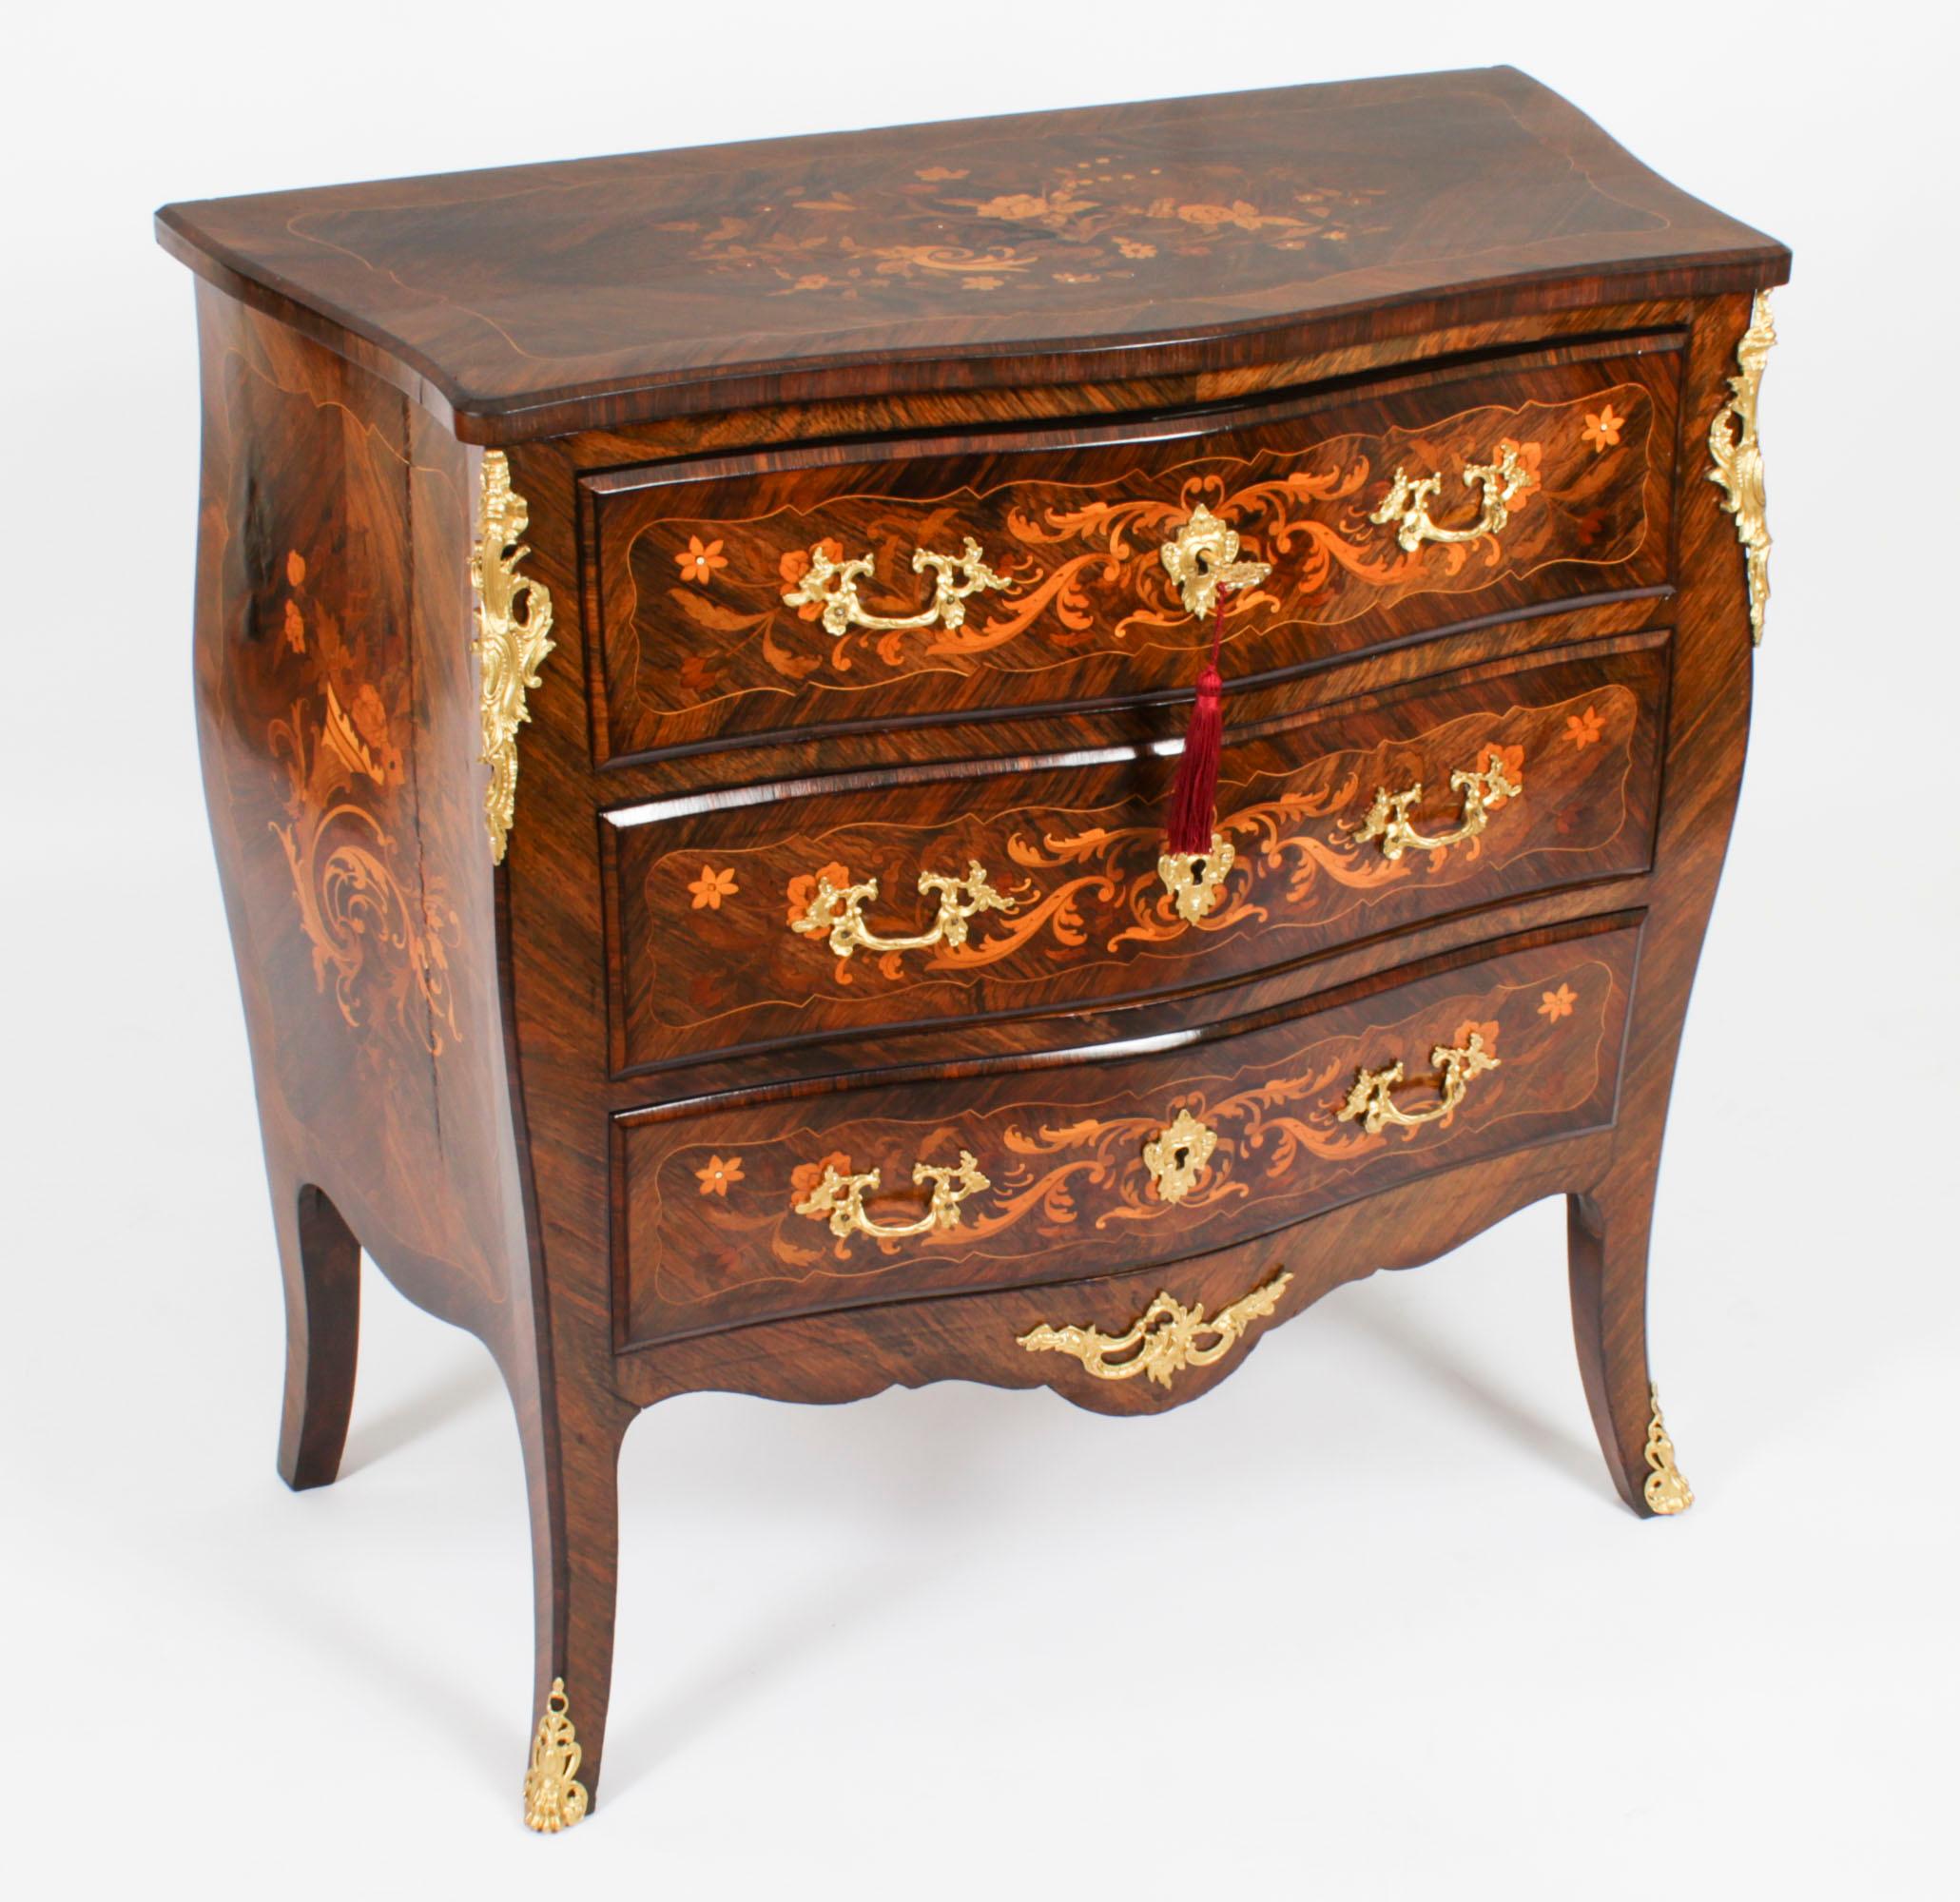 Antique French Louis Revival Marquetry Commode Chest of Drawers 19th Century For Sale 15